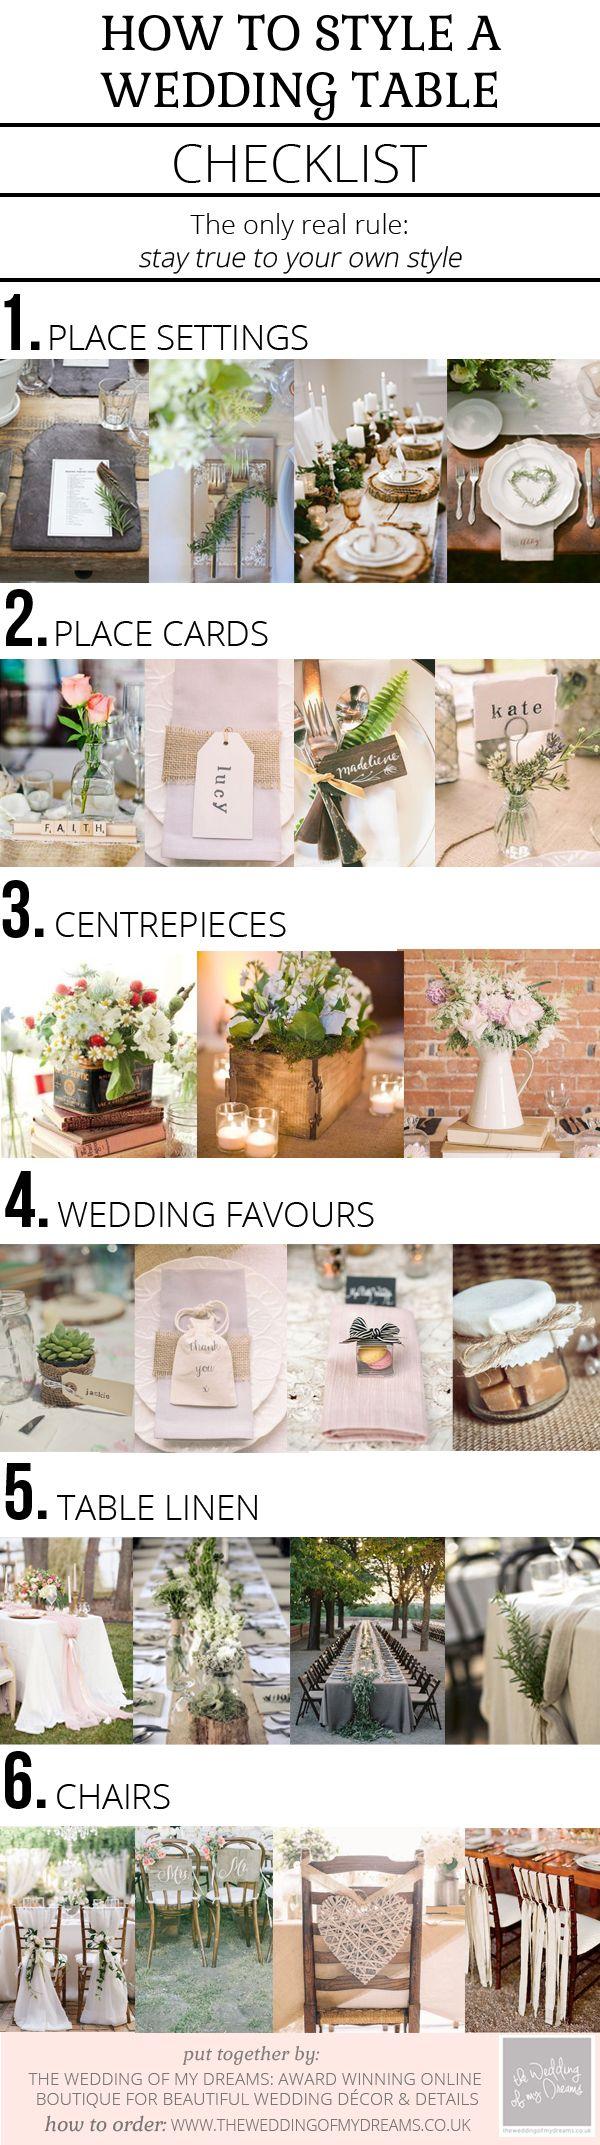 Wedding - How To Style A Wedding Table – Checklist